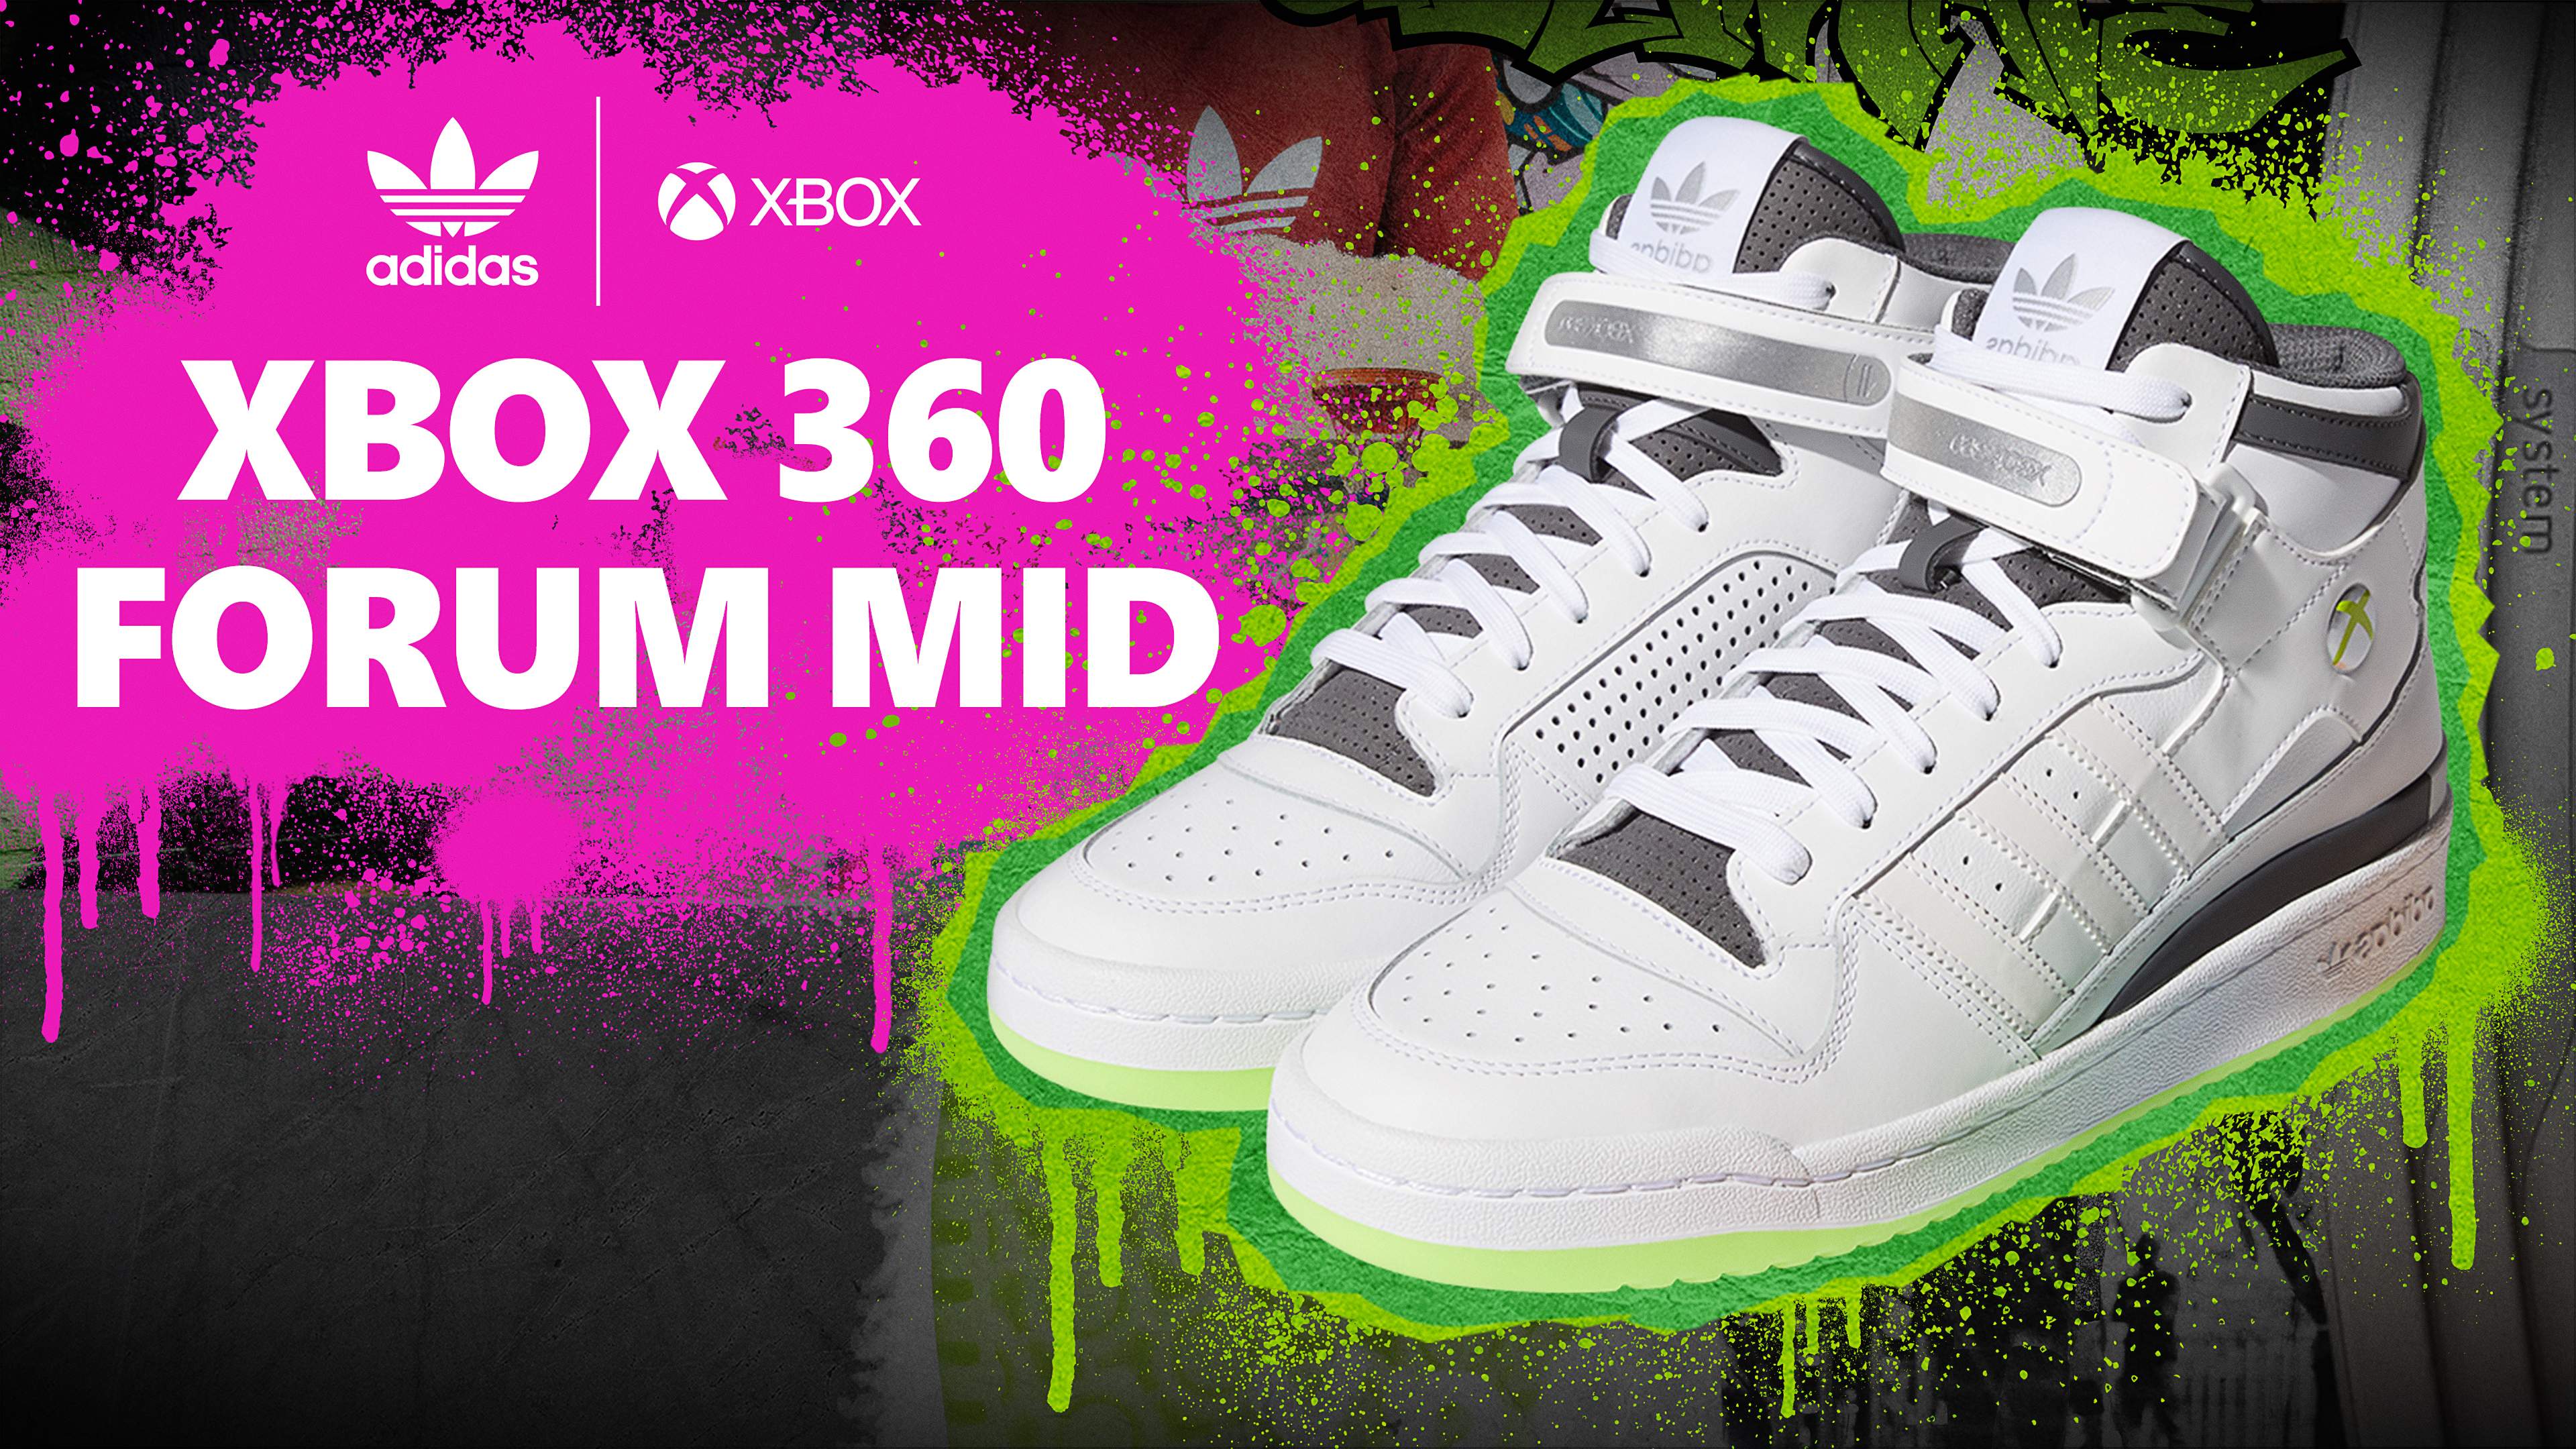 Xbox Unveils Its Second adidas Collaboration The Xbox 360 Forum Mid